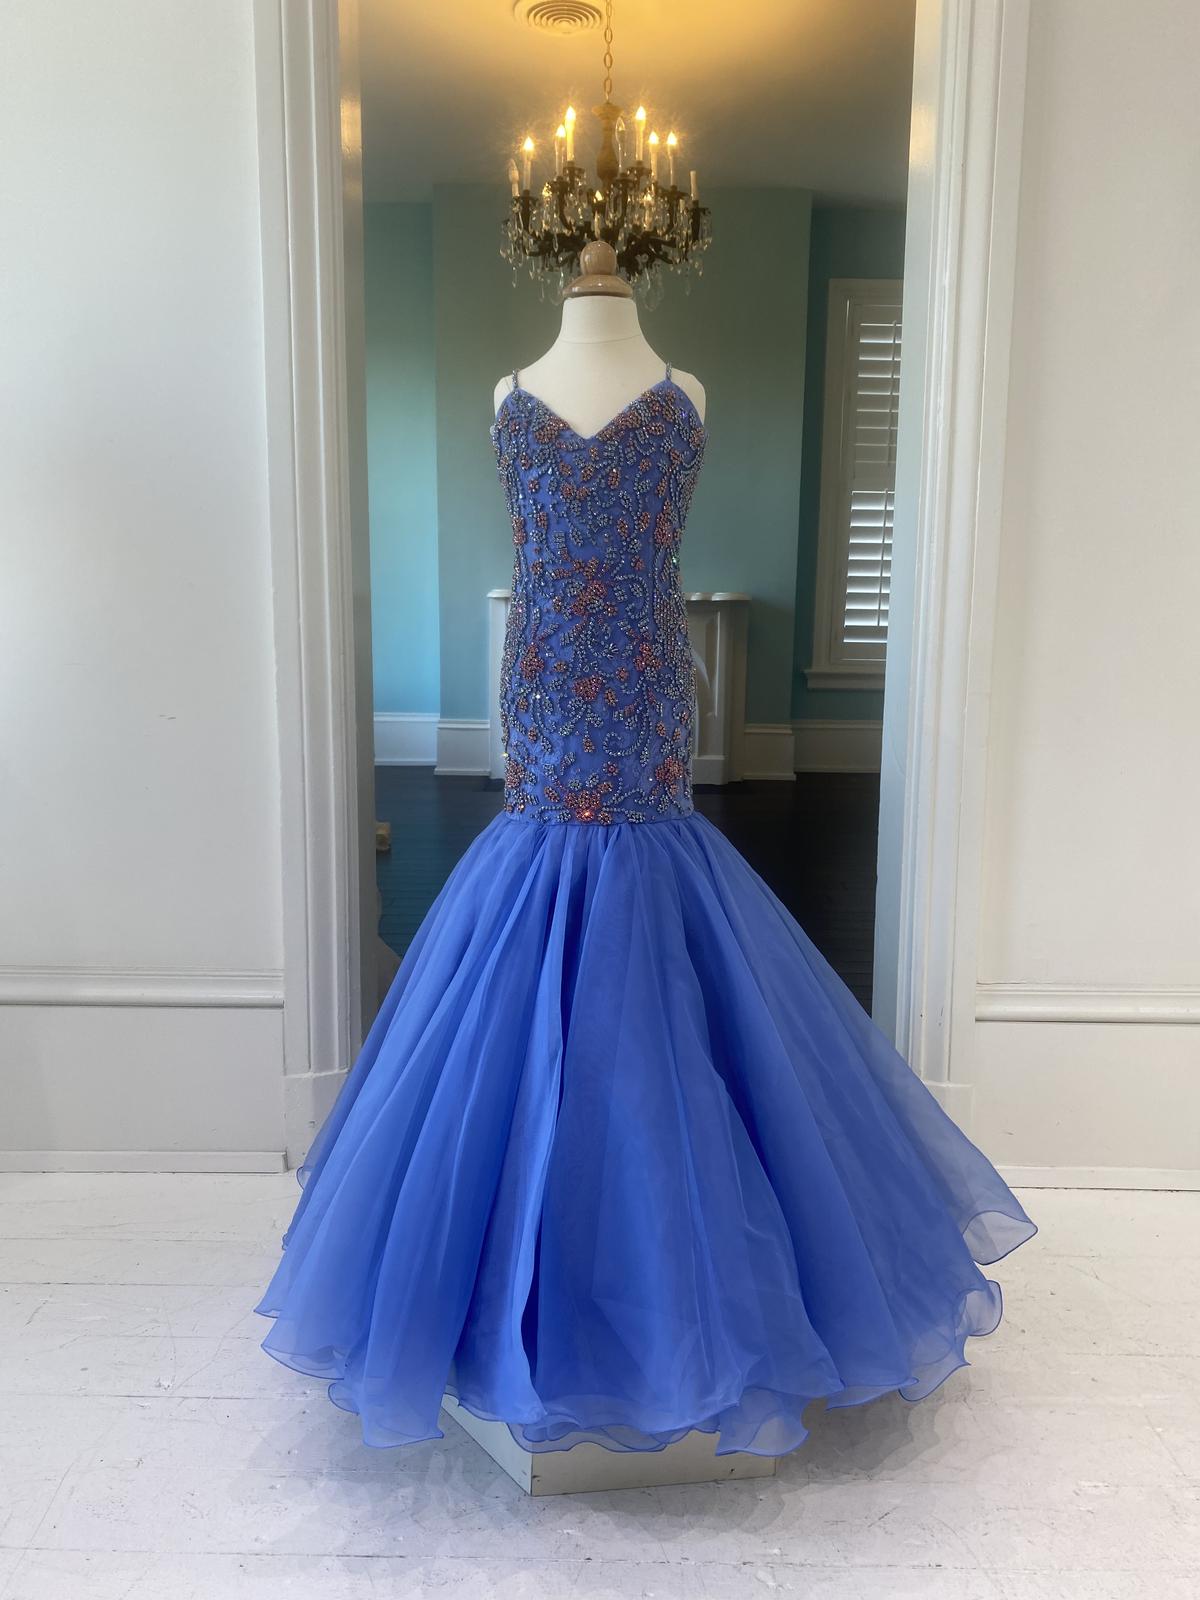 Sherri Hill Periwinkle Children's Pageant Gown